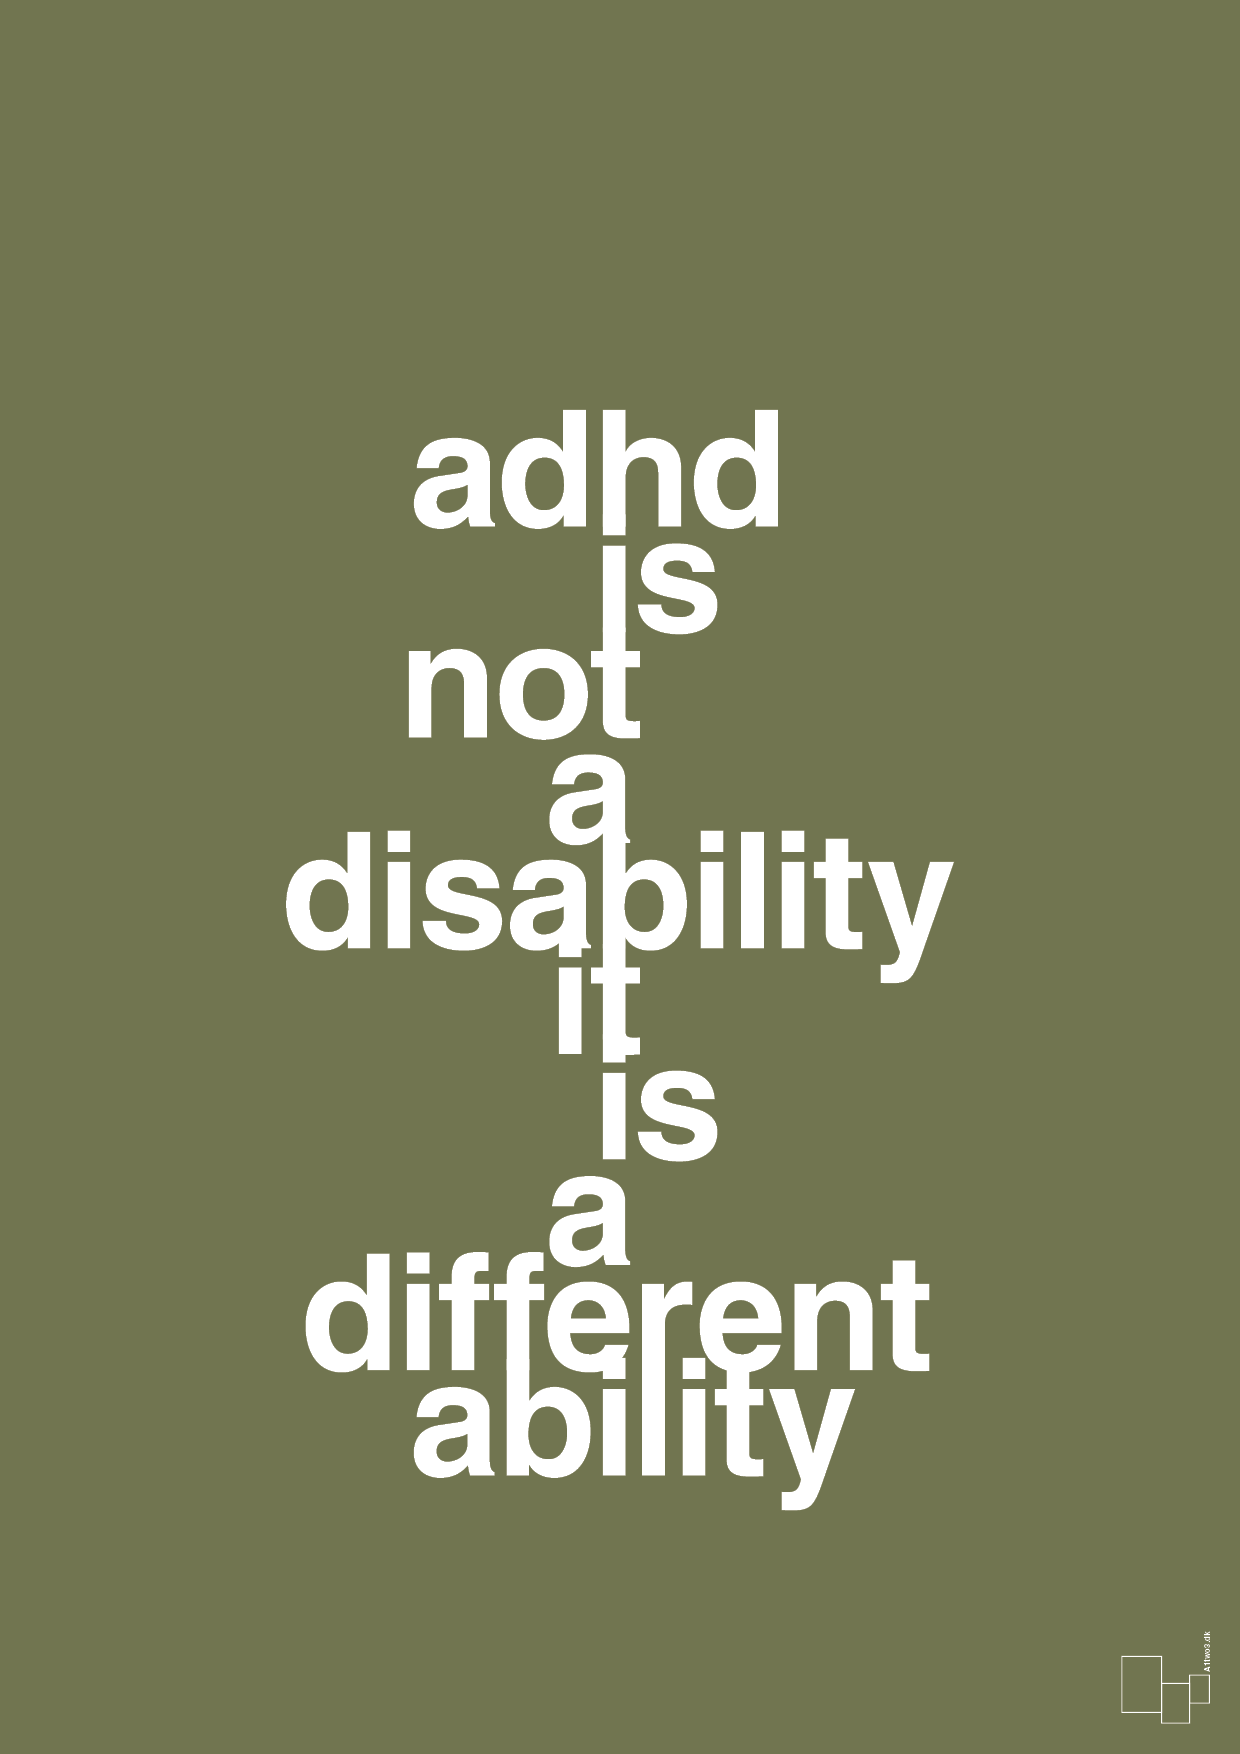 adhd is not a disability it is a different ability - Plakat med Samfund i Secret Meadow